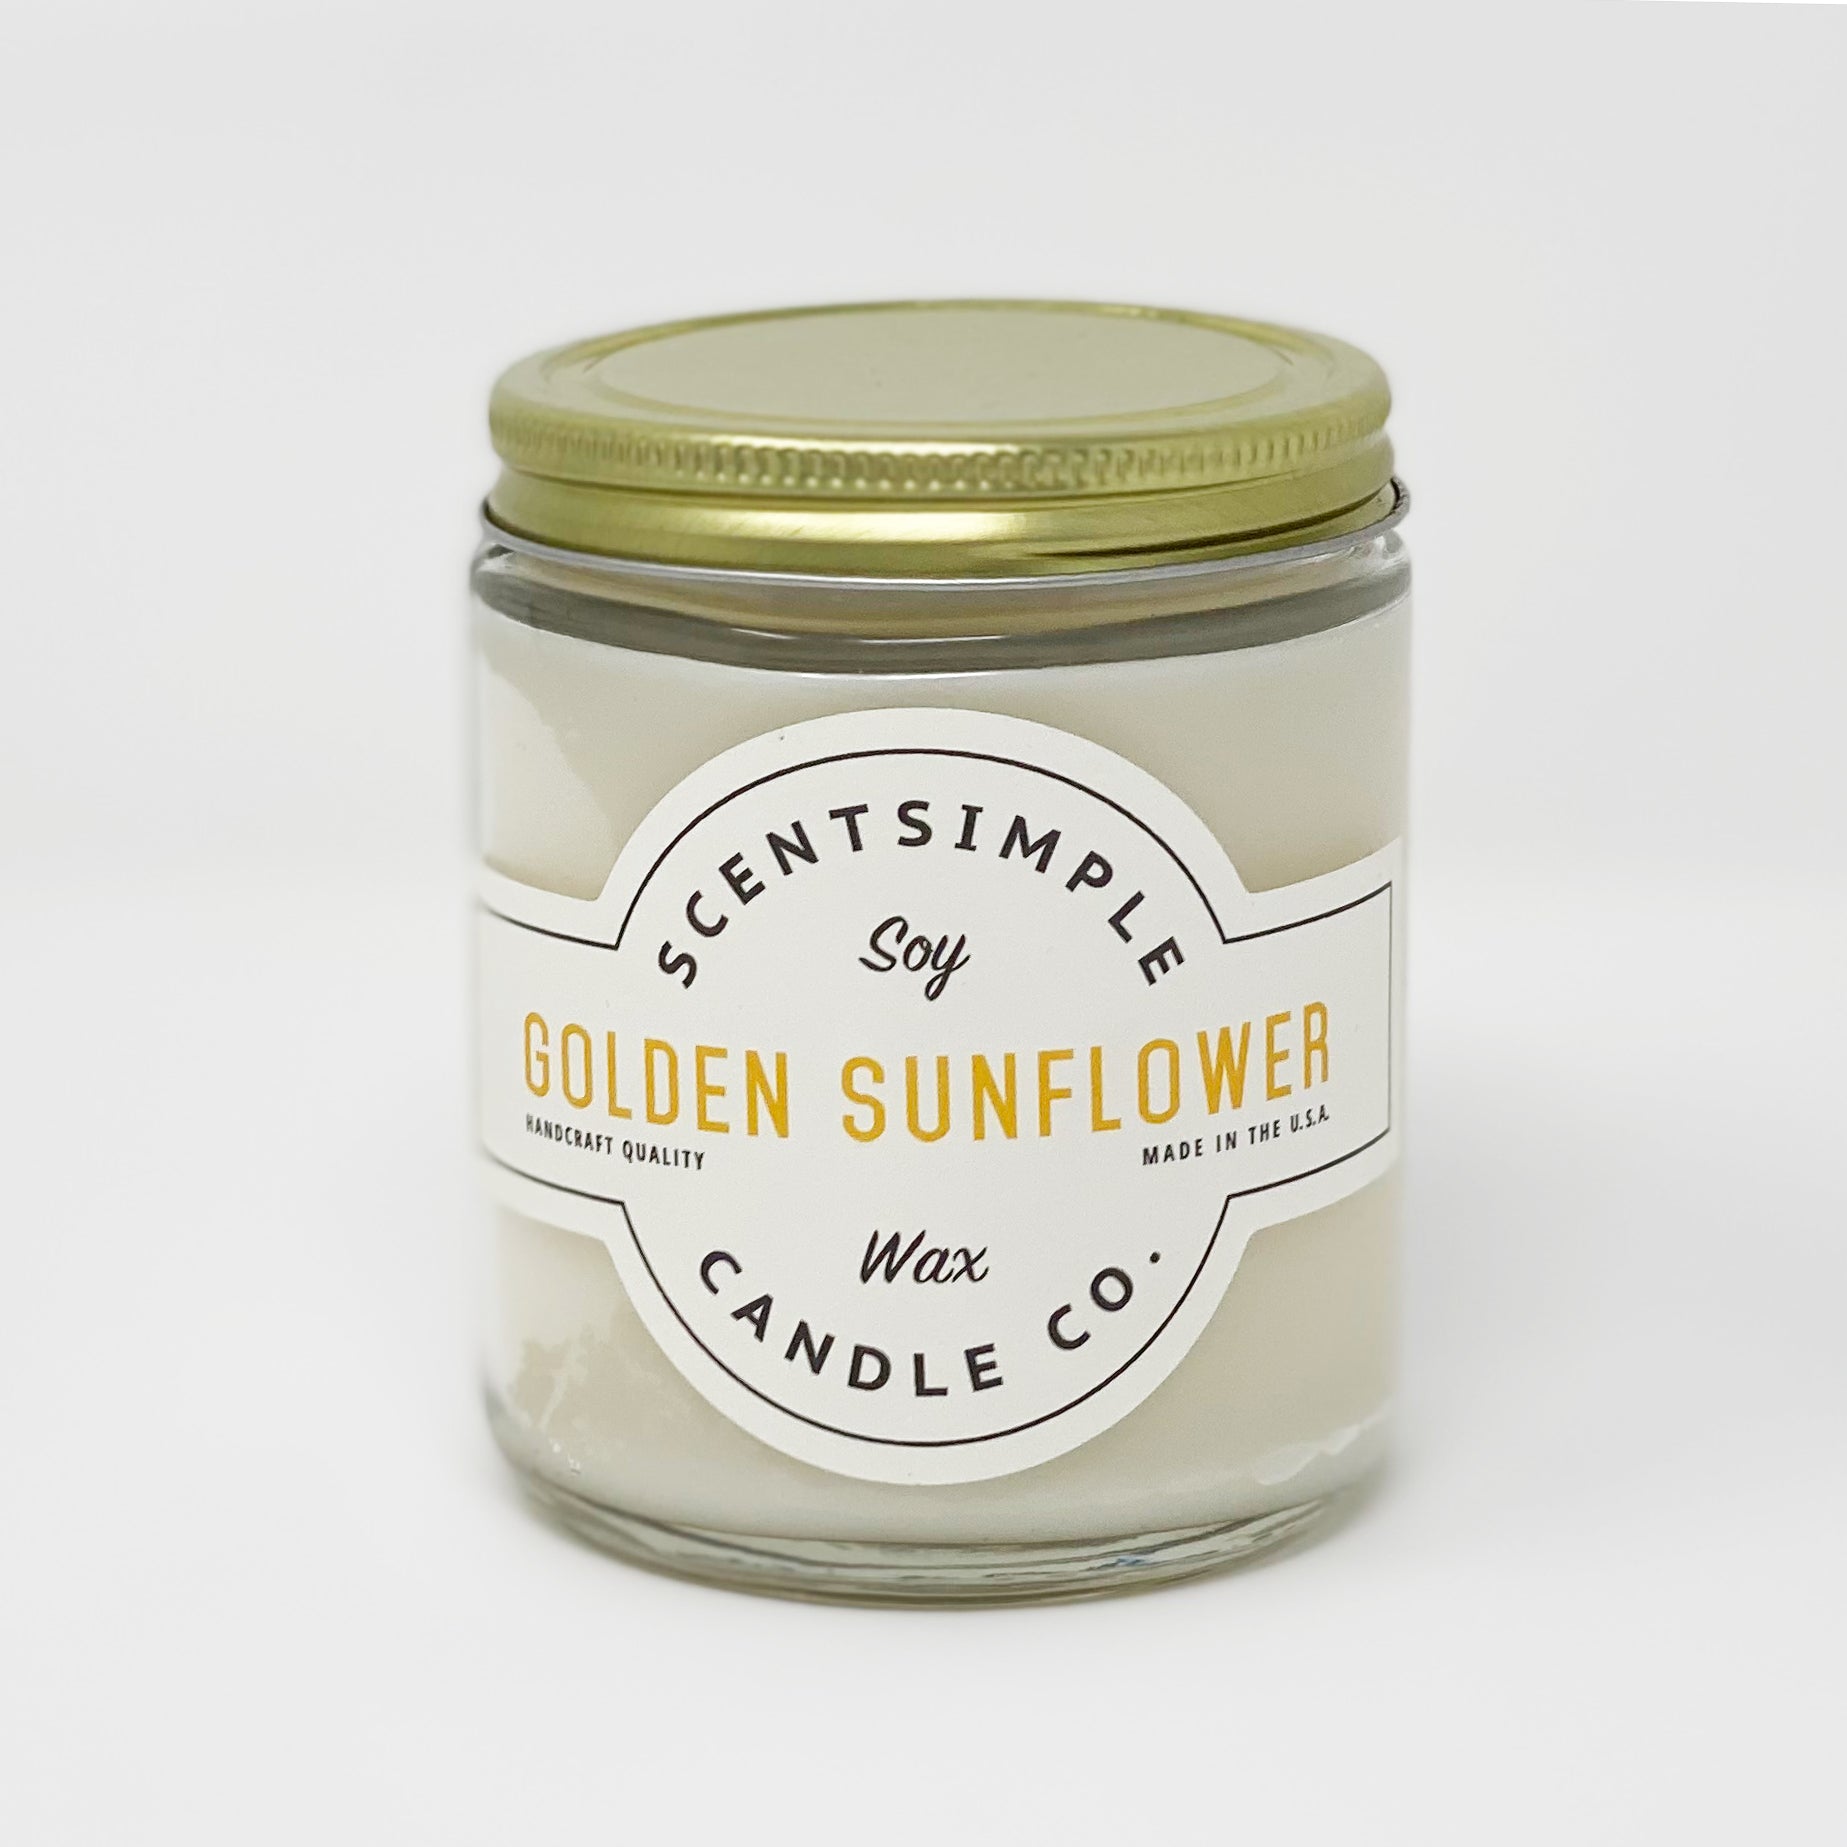 Golden Sunflower Scented Soy Wax Candle - ScentSimple Candle Co.